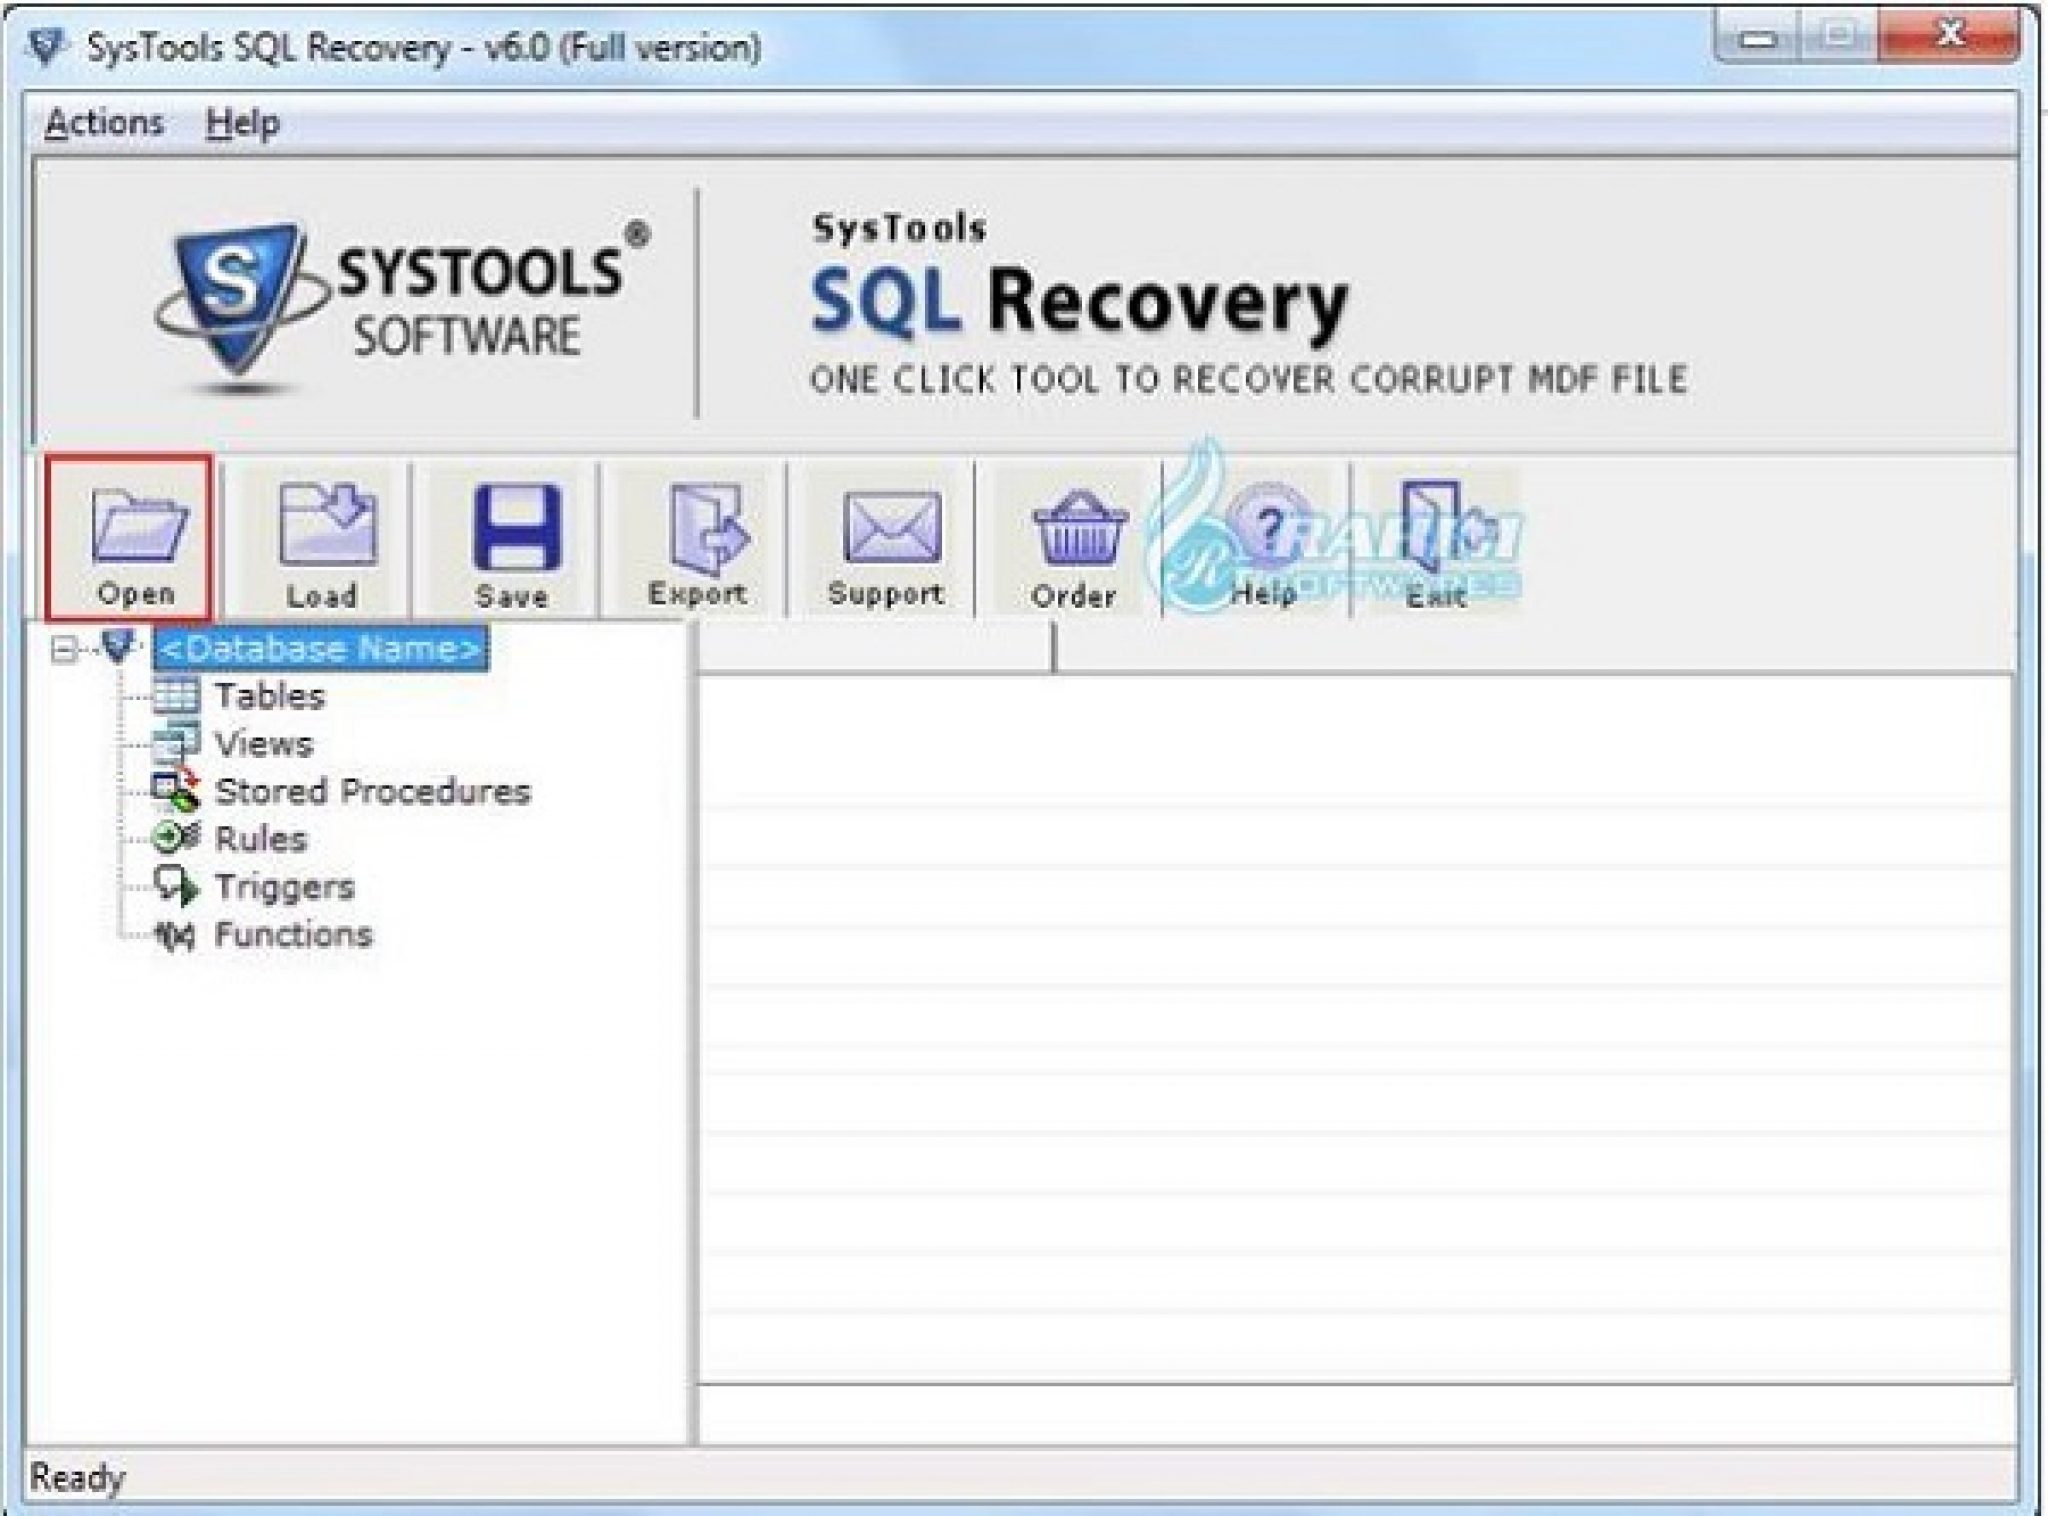 systools hotmail backup serial